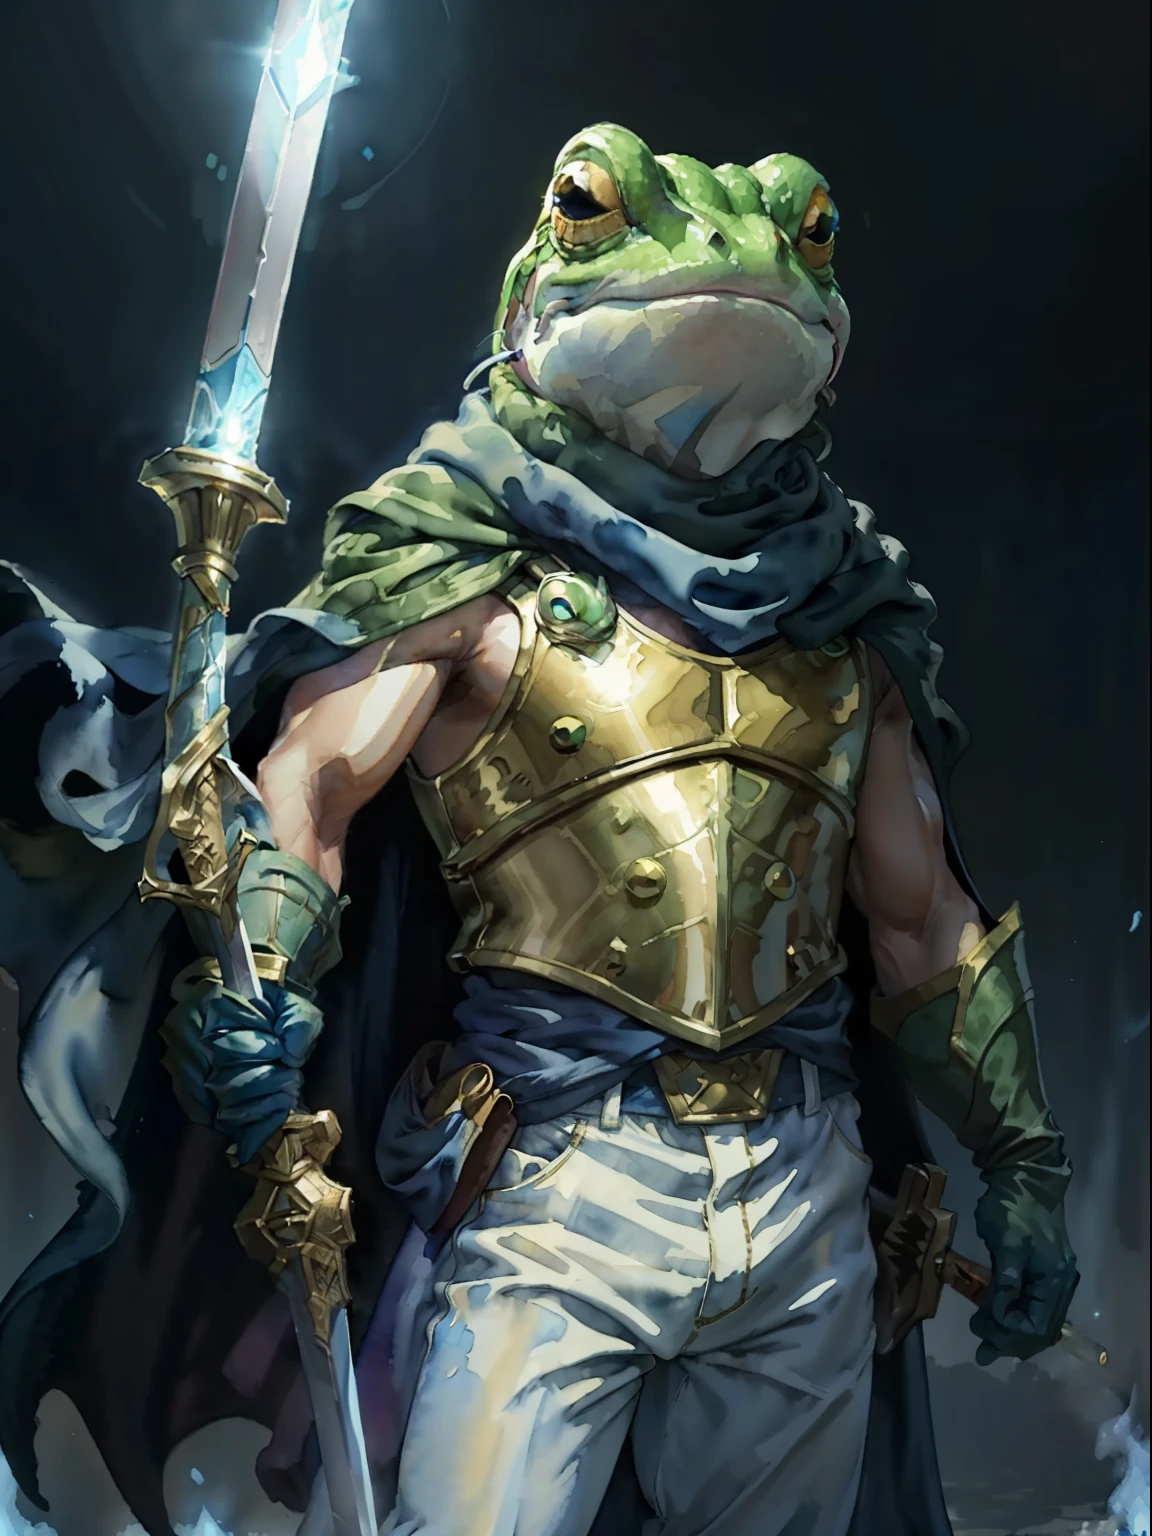 masterpiece, (watercolor \(medium\):1.2),solo, 1boy, Frog_CT frog, gold breastplate, holding sword and shield, blue glove, white pants, green cape, blue lights, blue fire, dark scene